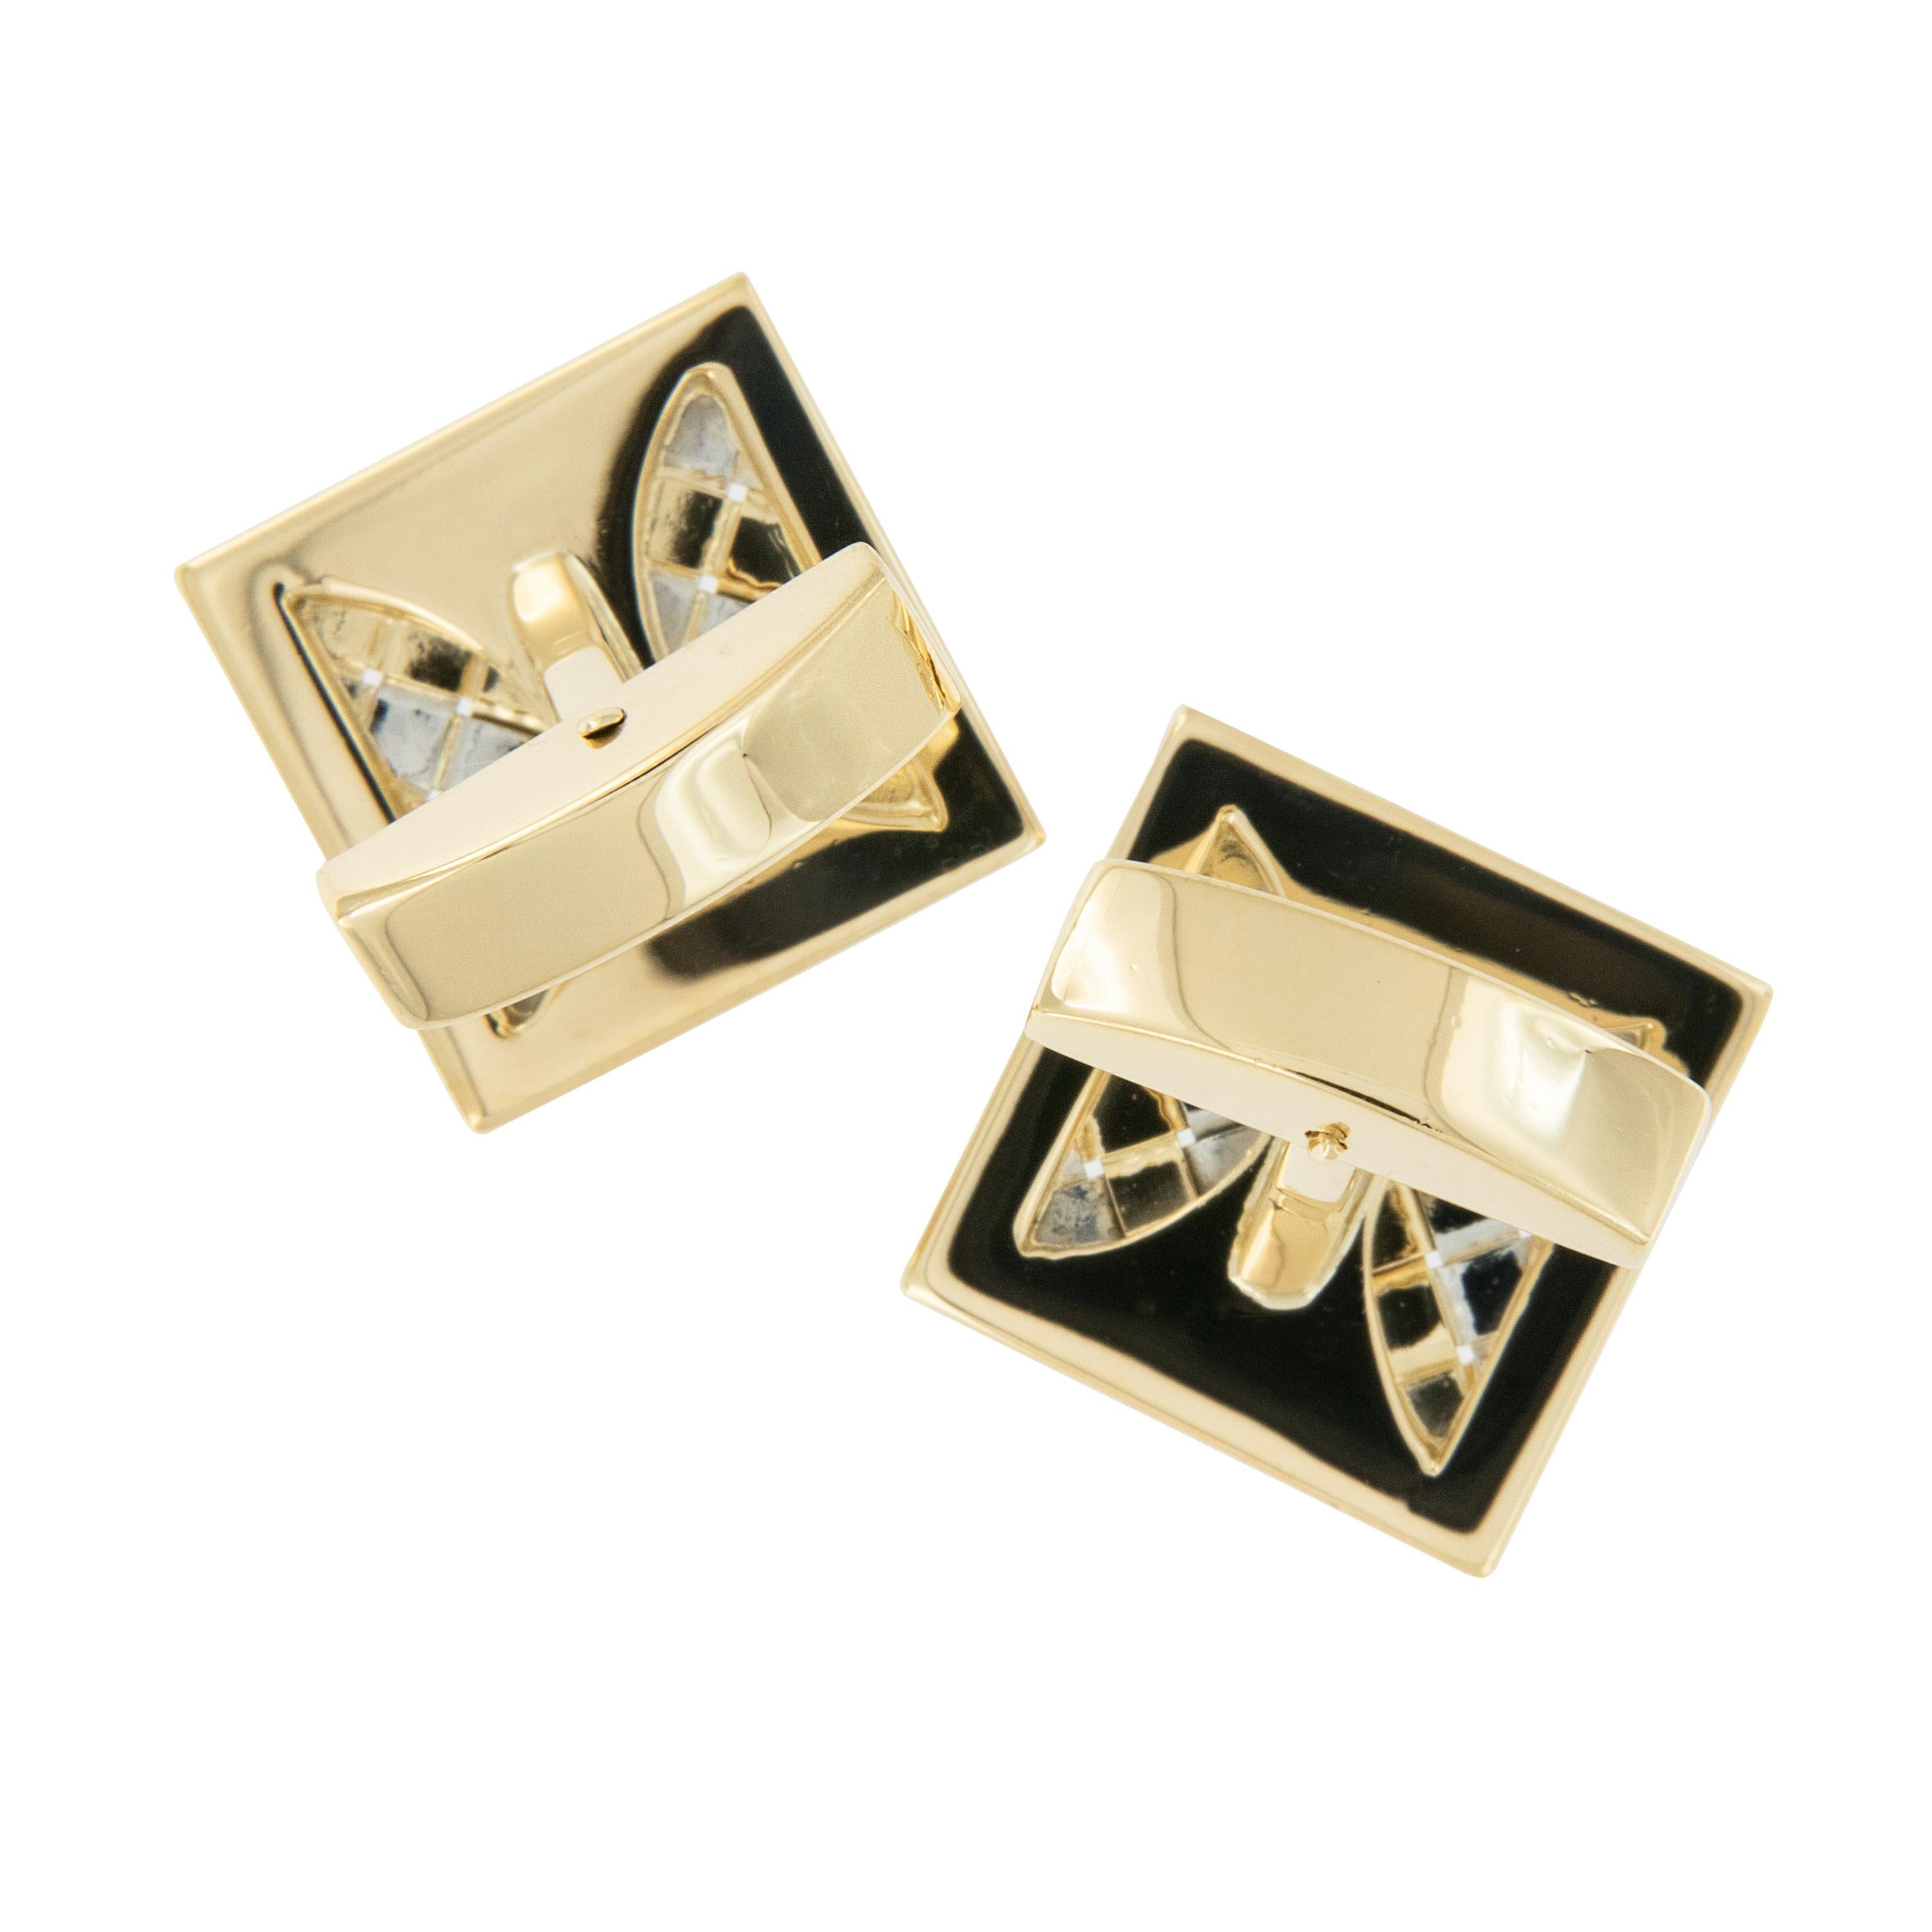 Heavy 18 Karat Yellow and White Gold Woven Style Handmade Cufflinks by Schubot In Excellent Condition For Sale In Troy, MI